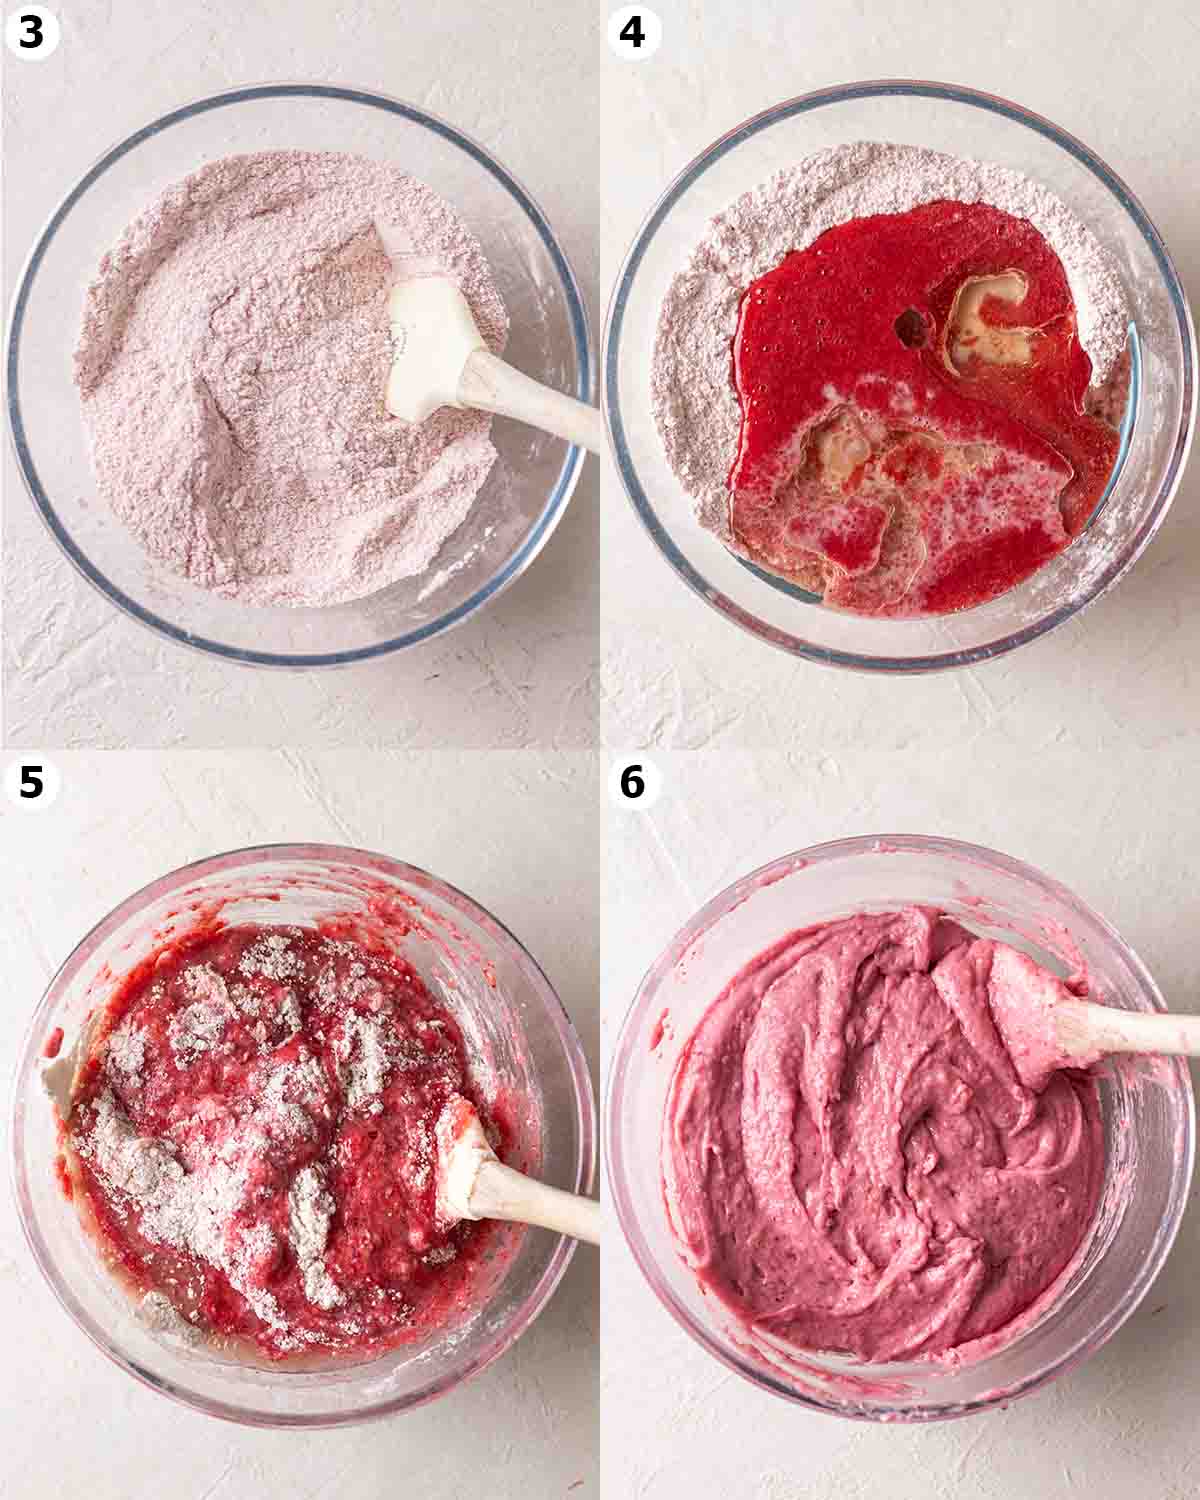 Four image collage of making the batter for the strawberry cupcakes.